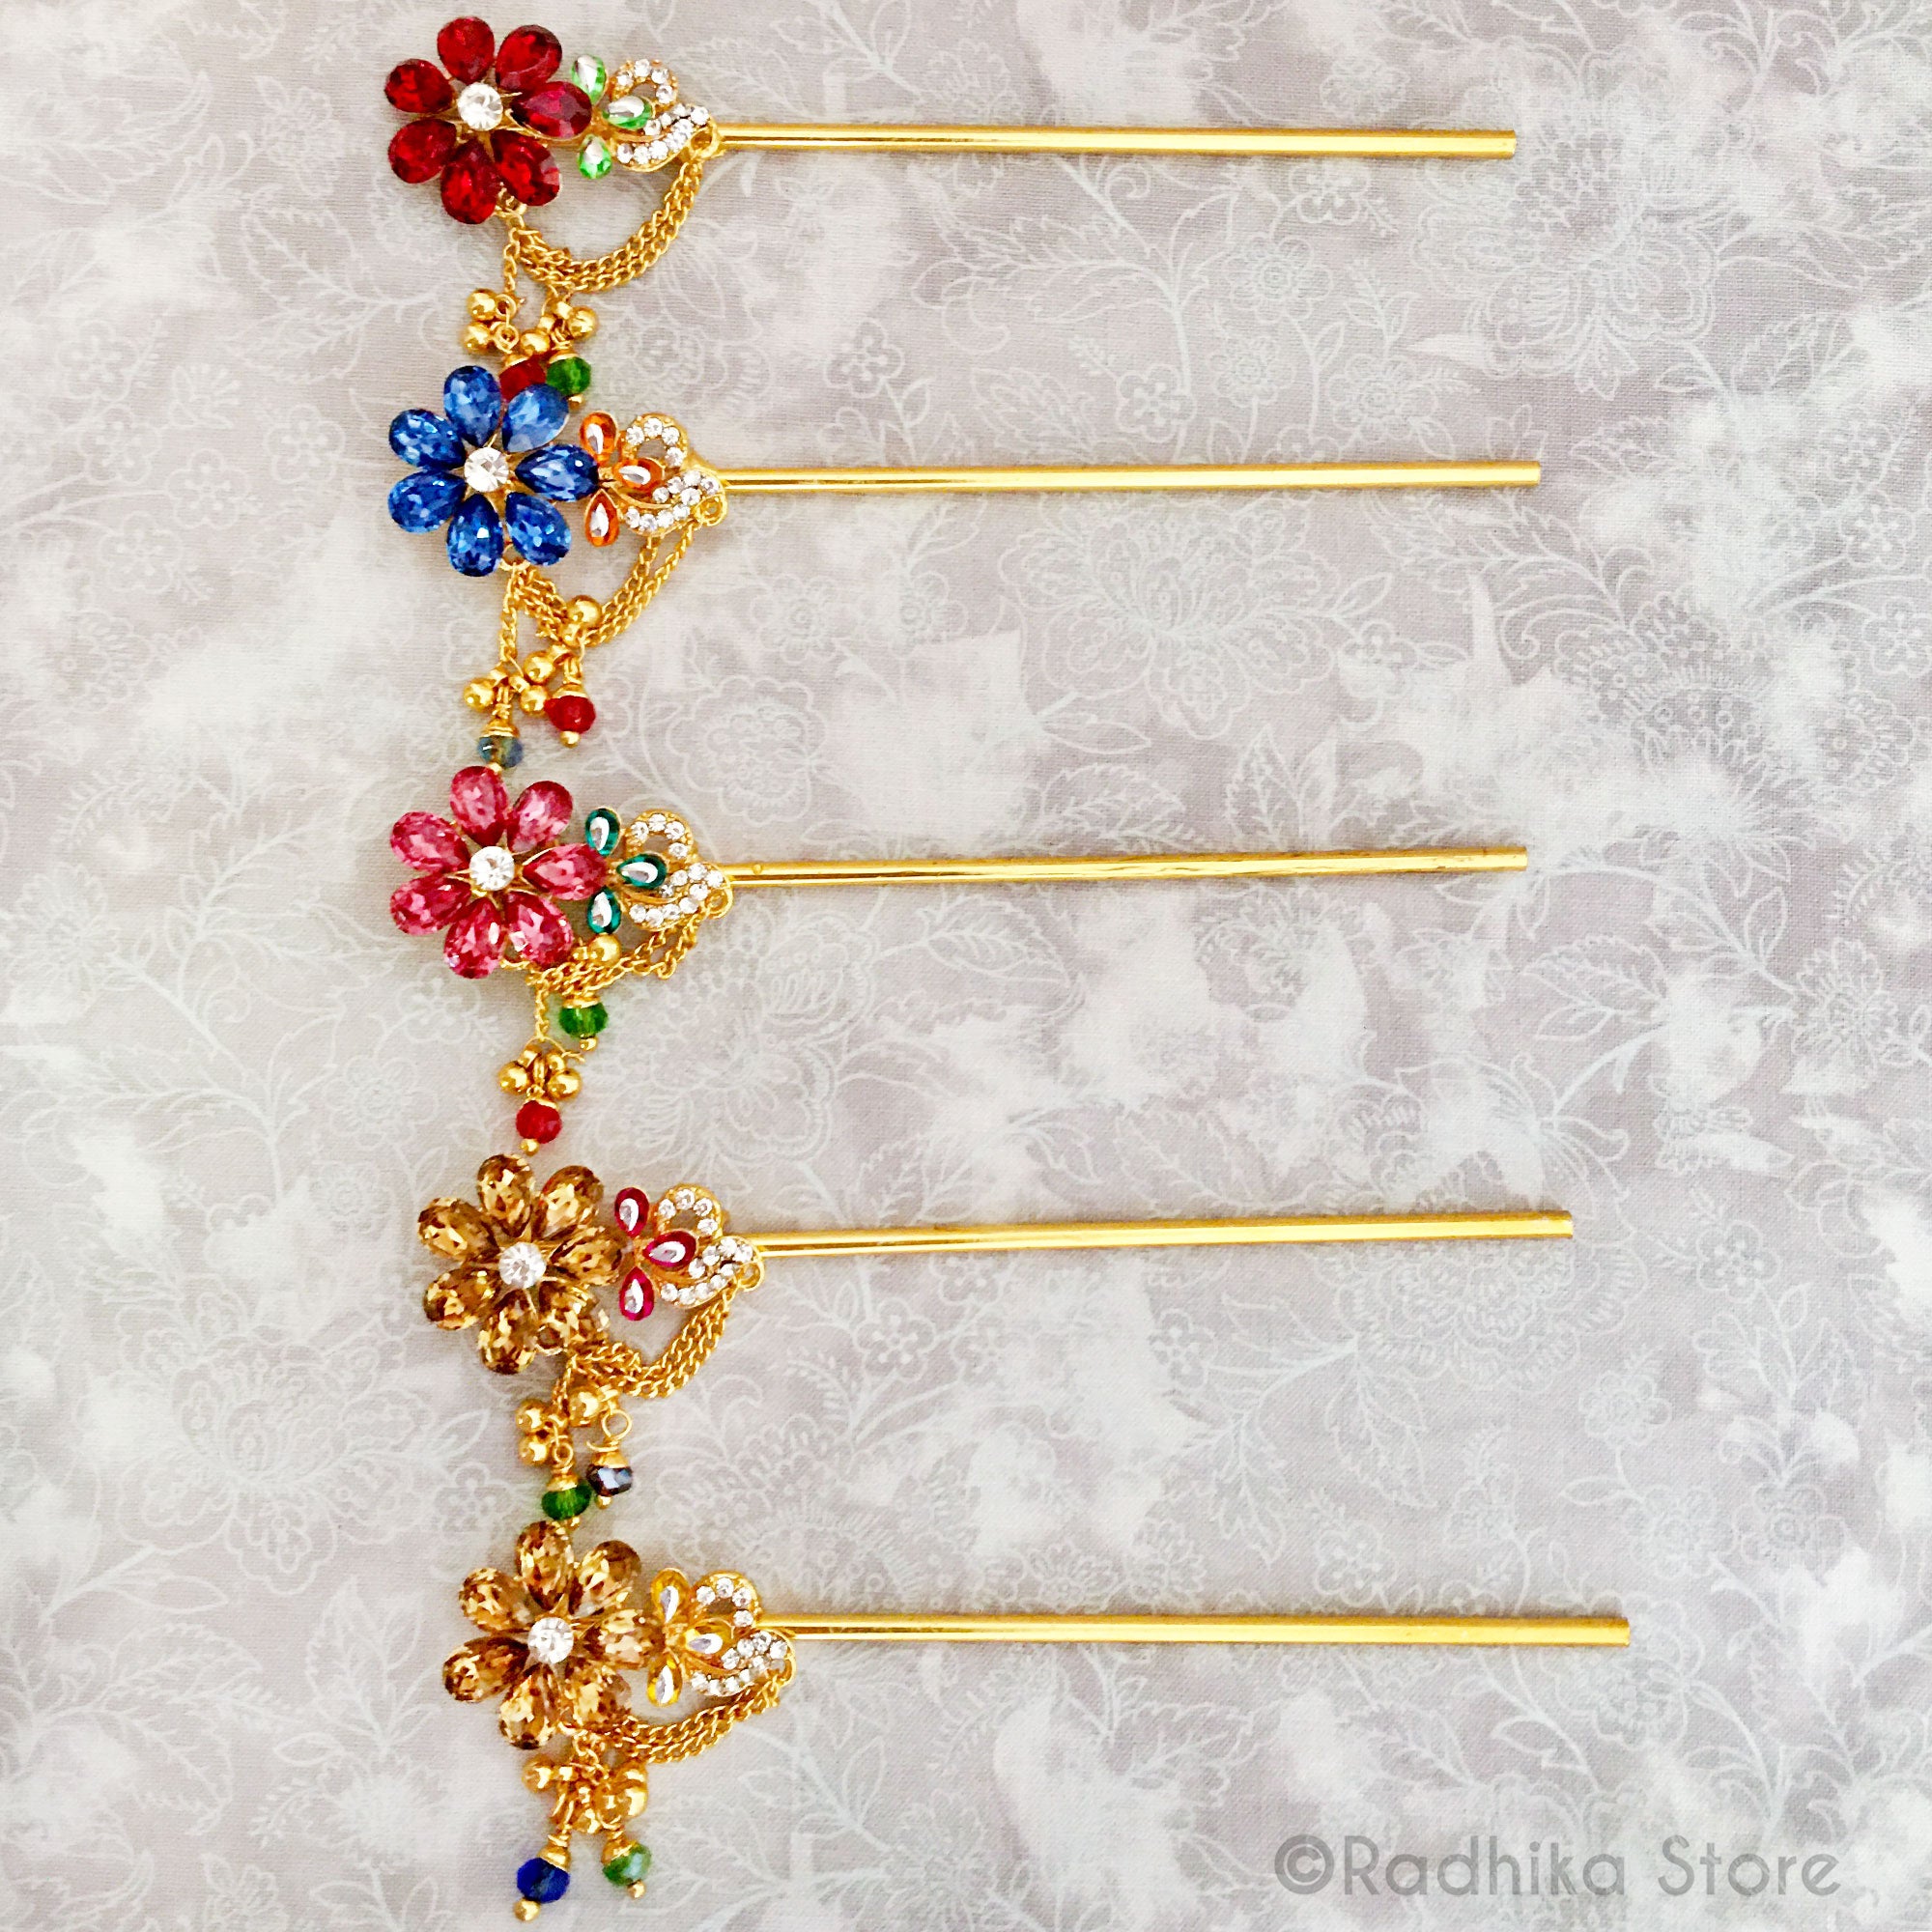 Vrindavan Flower With Bells and Bees - Choose Color - Red - Blue - Pink - Gold - Size Large 5 1/2 Inch